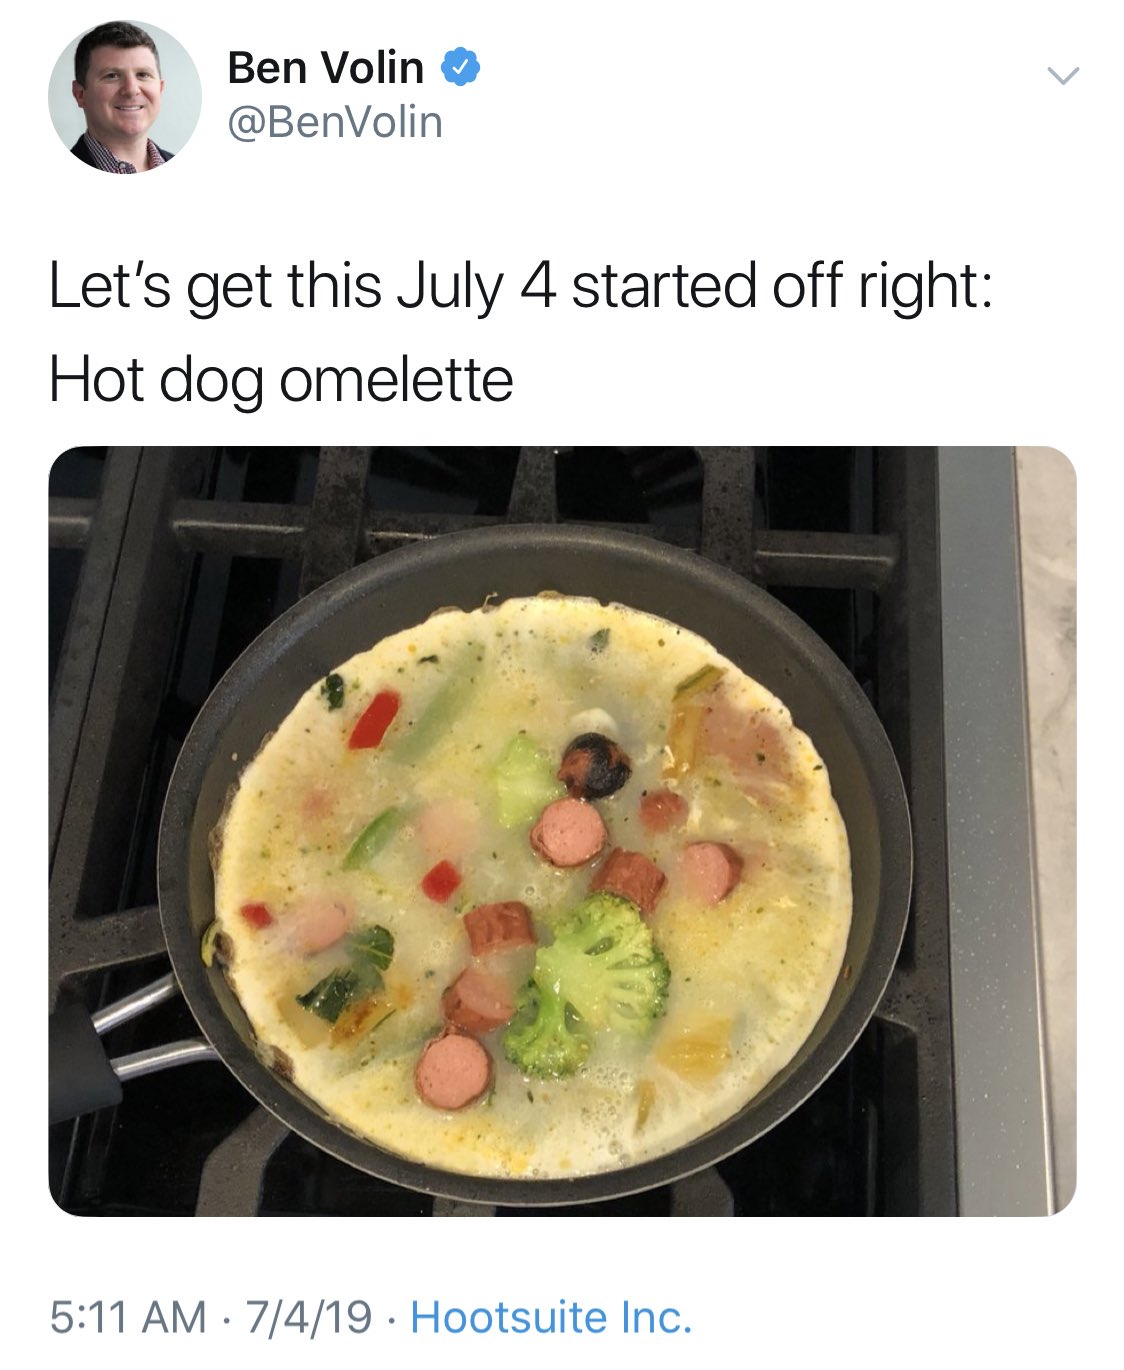 Let's get this July 4 started off right Hot dog omelette